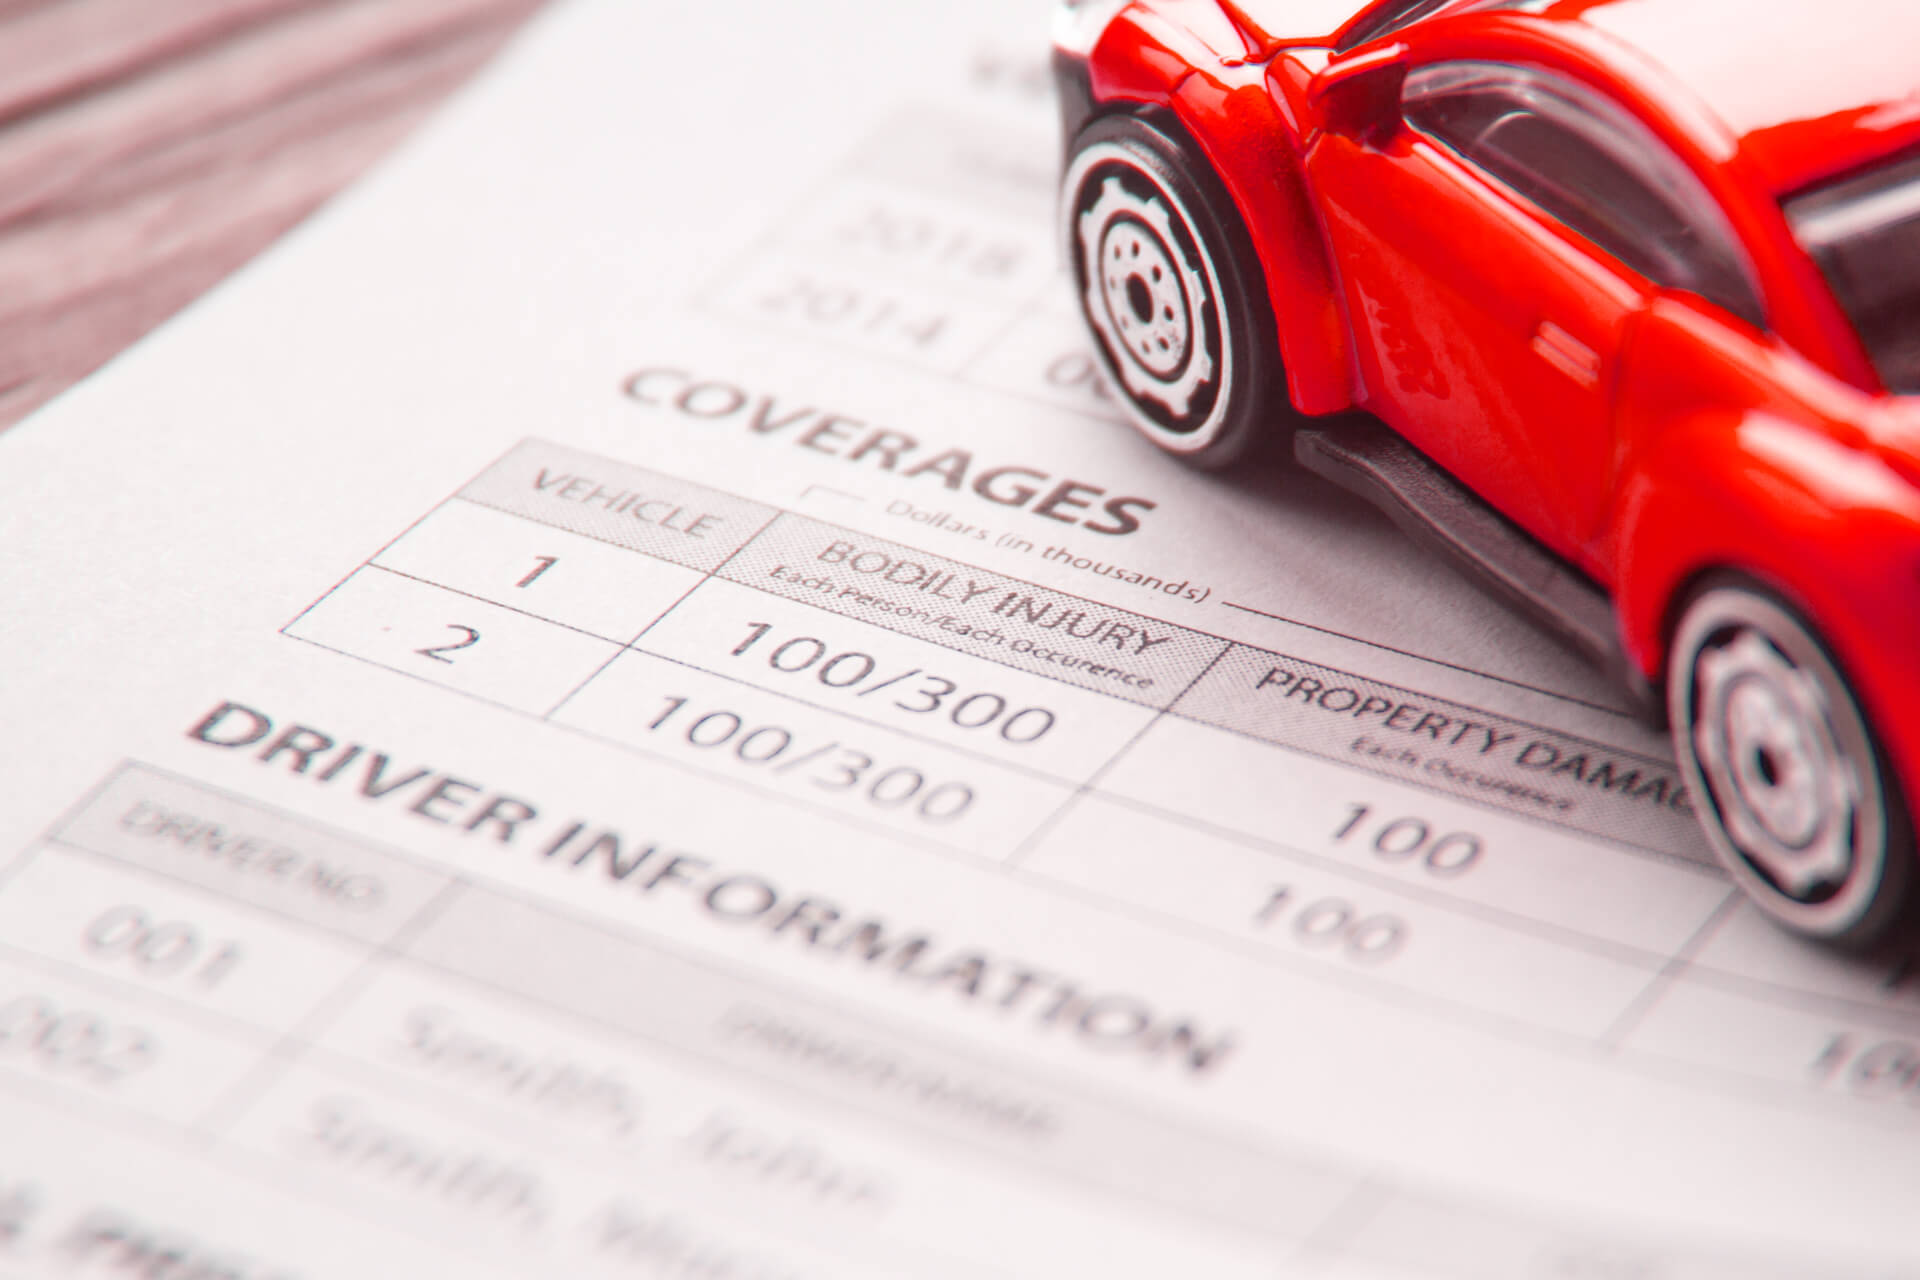 Car insurance policy showing driver information free image download